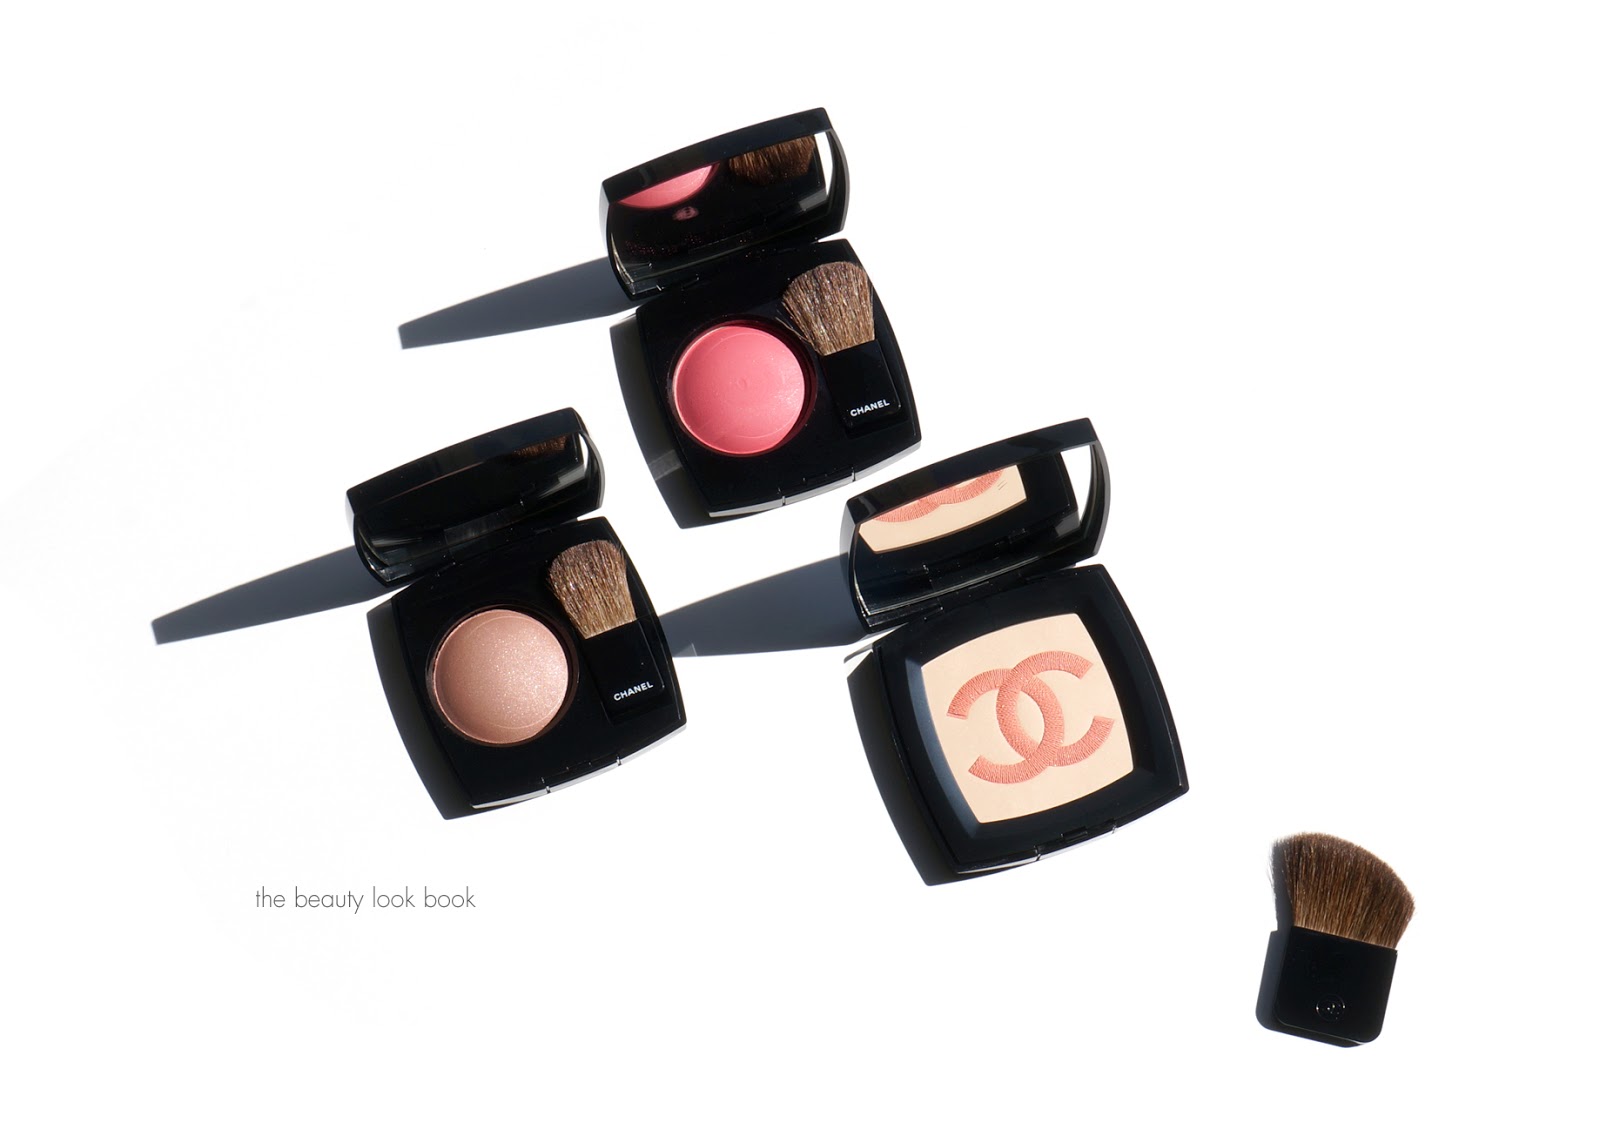 Chanel Joues Contraste Powder Blush in Golden Sun and Vibration